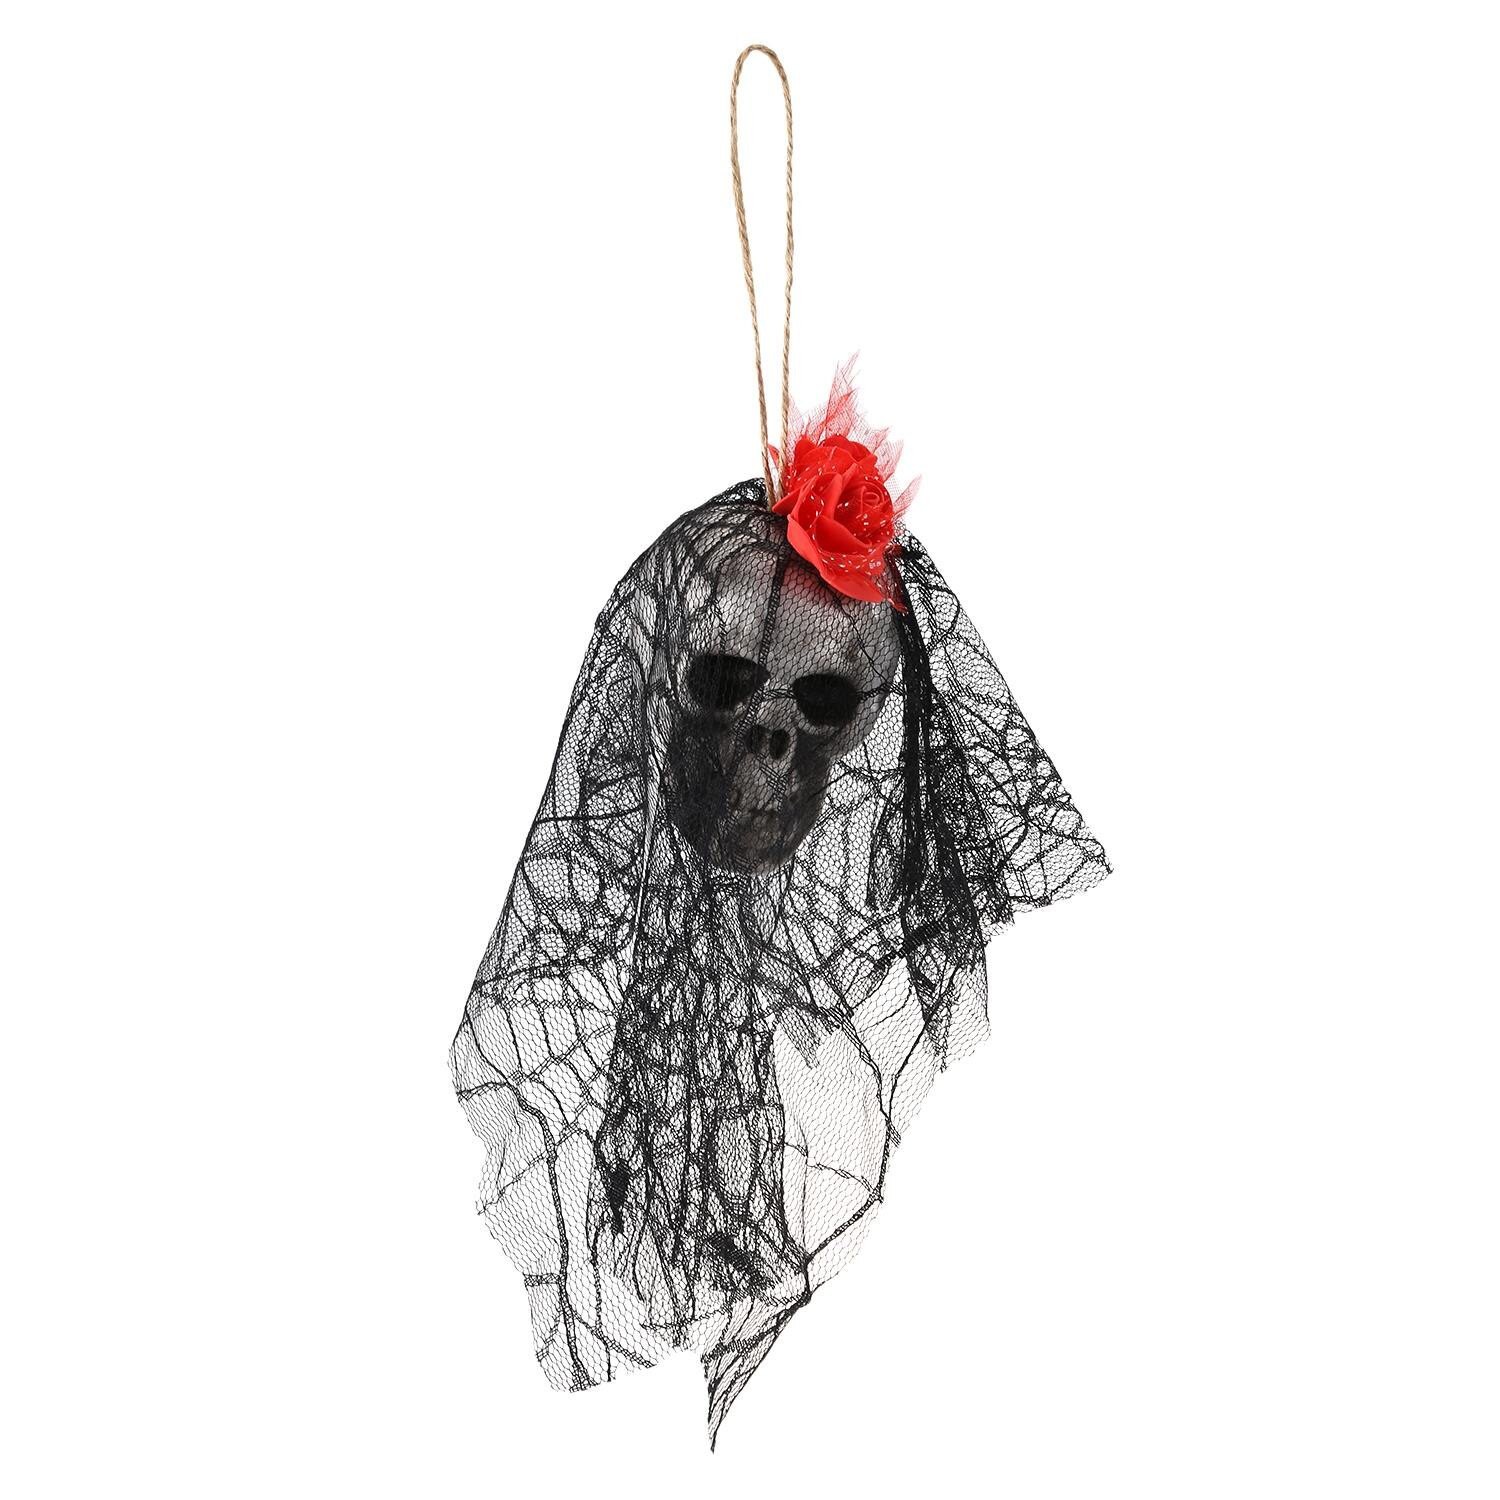 Outdoor Animated Halloween Decorations
 Hanging Witch Prop Animated Skeleton Ghost Scary Yard